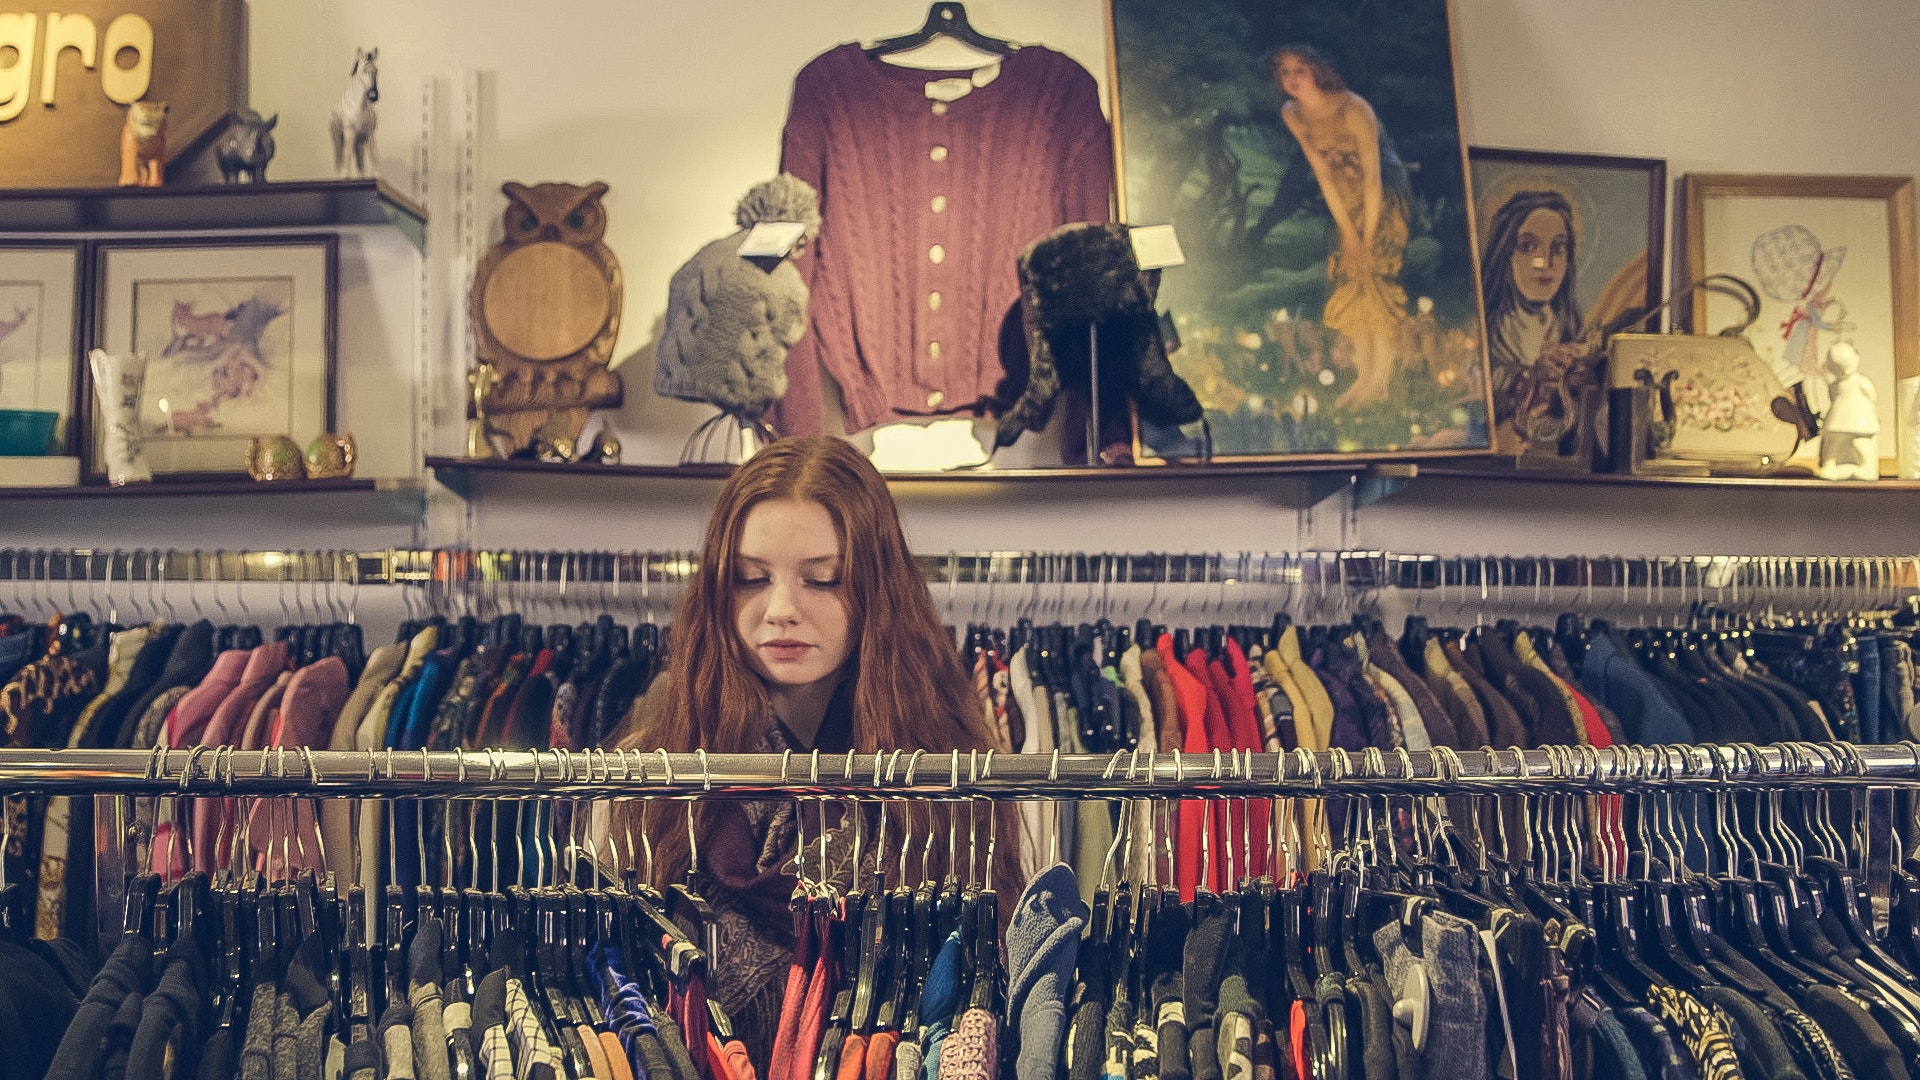 Shop for Vintage Clothes at These Boston Stores